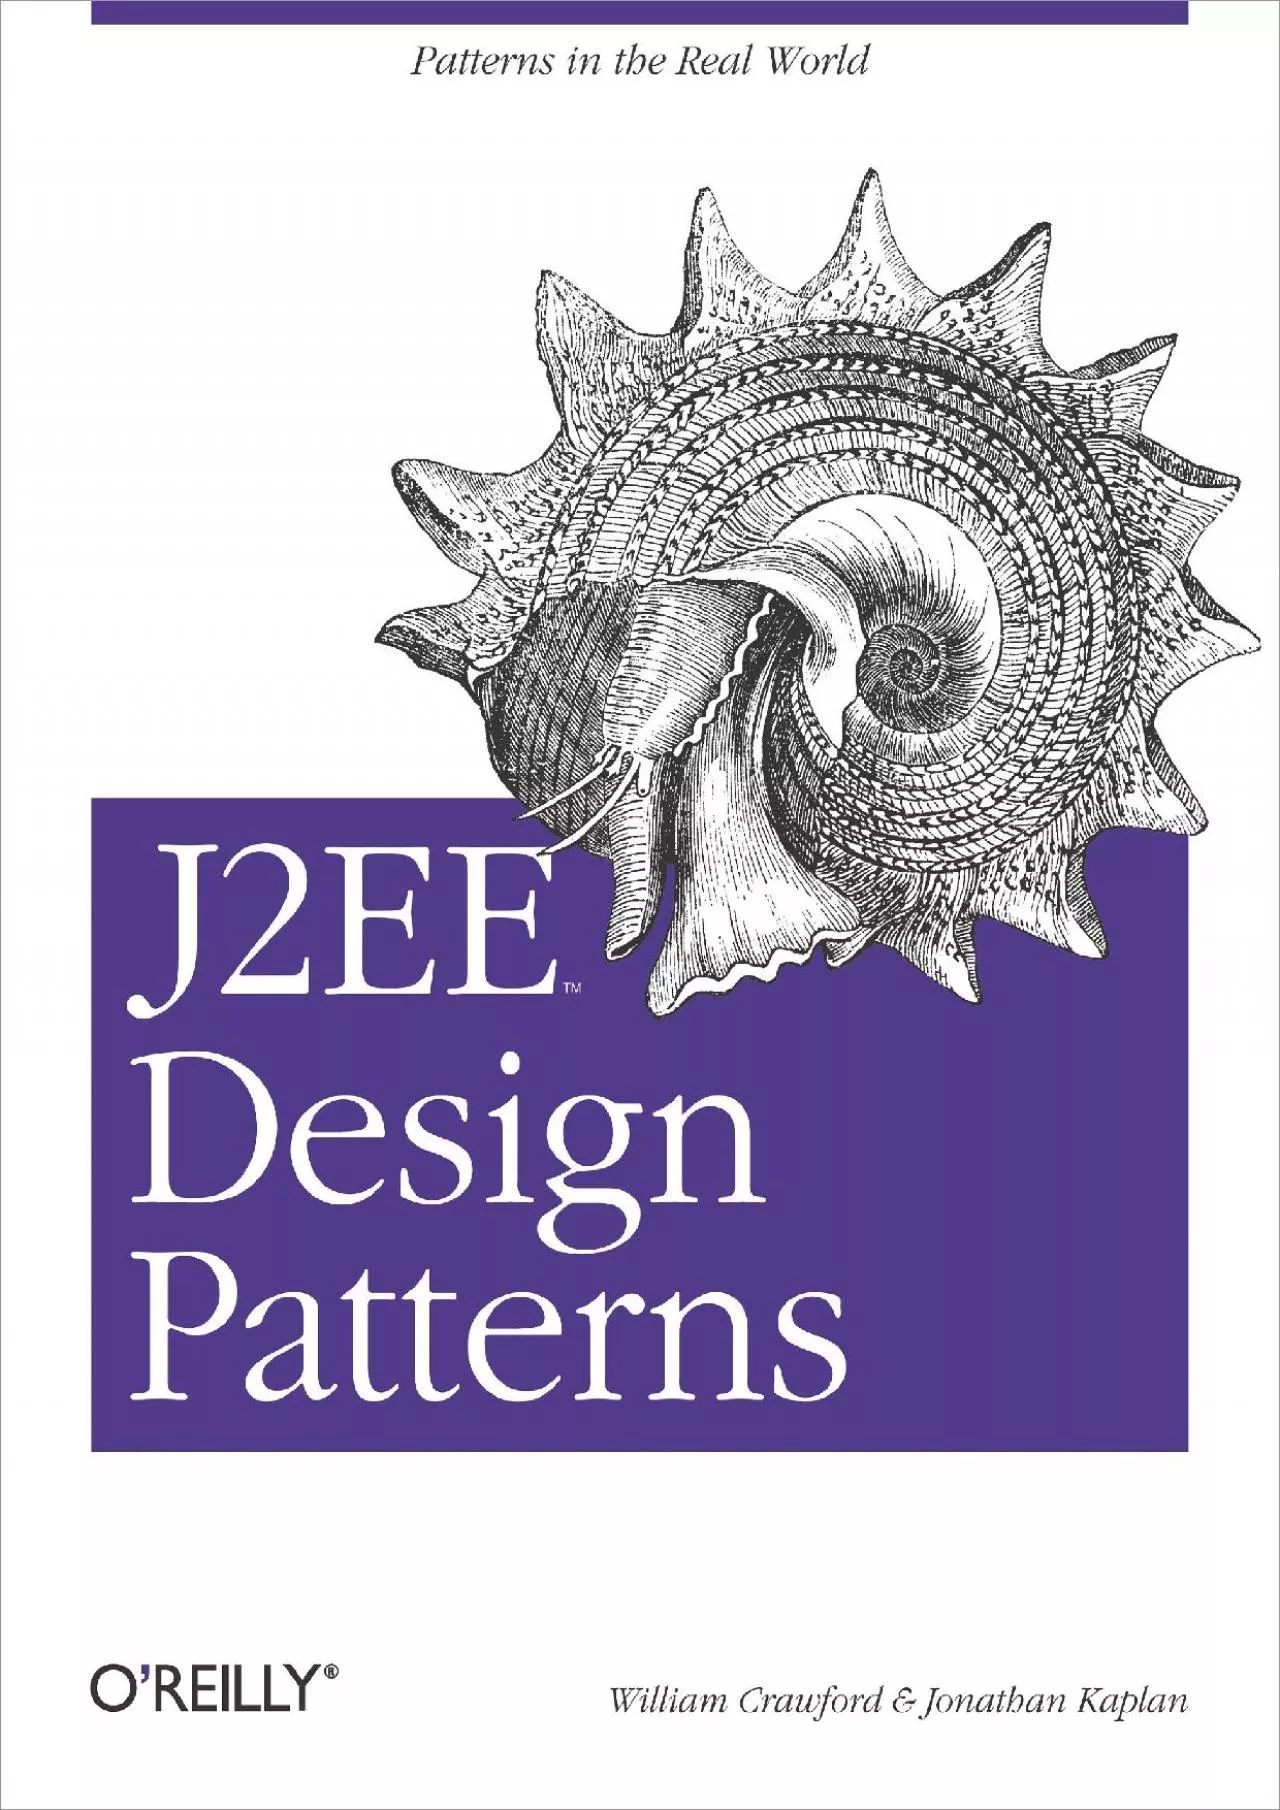 [eBOOK]-J2EE Design Patterns: Patterns in the Real World